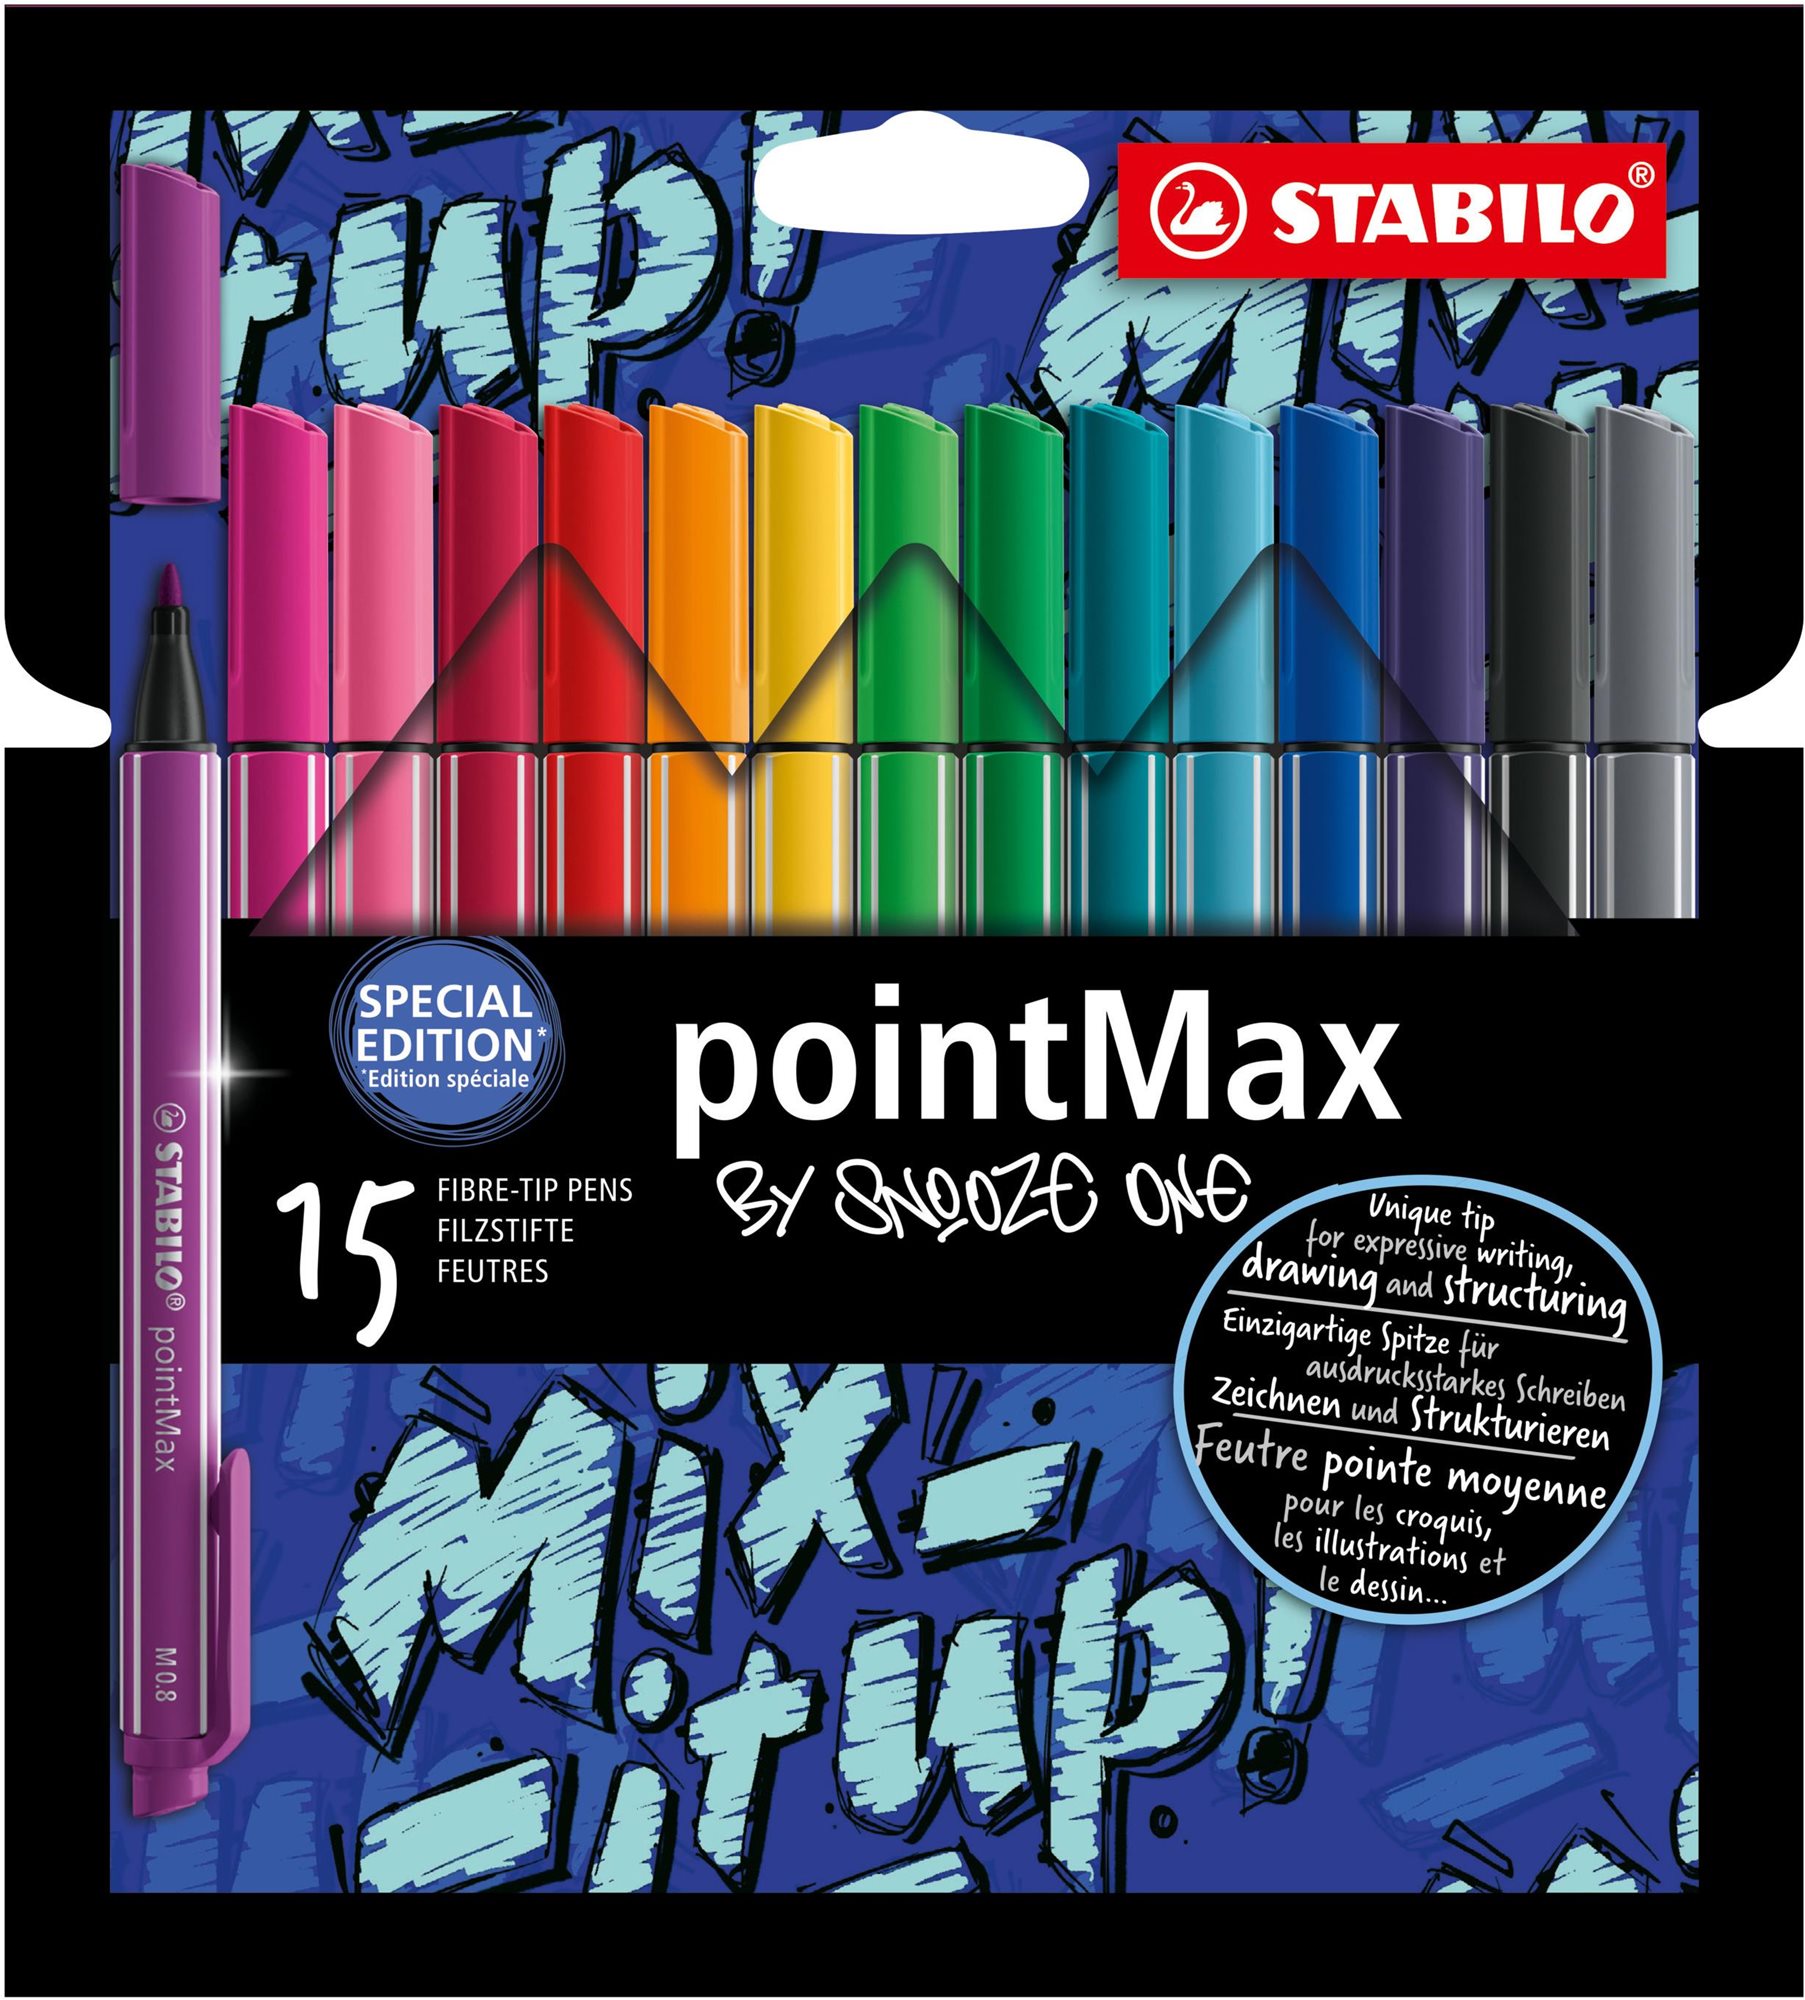 Liner STABILO pointMax Snooze One Edition 15 db